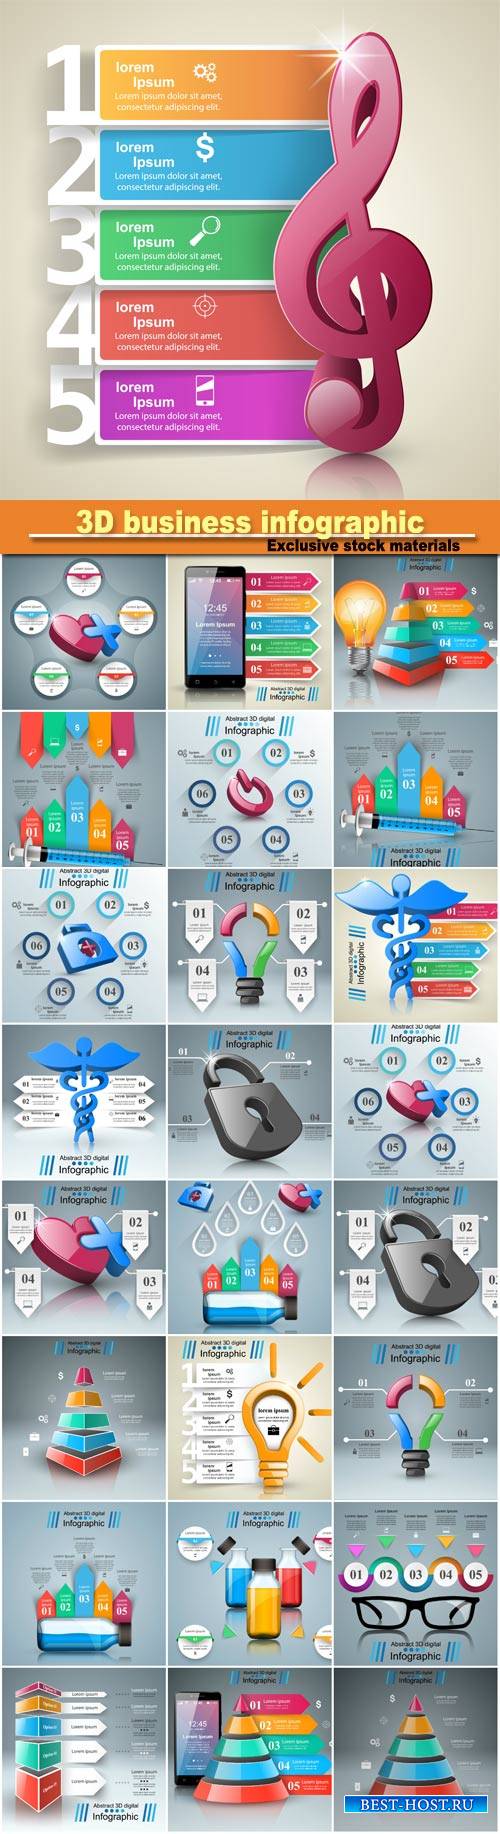 3D business infographic design template and marketing icons, vector illustration